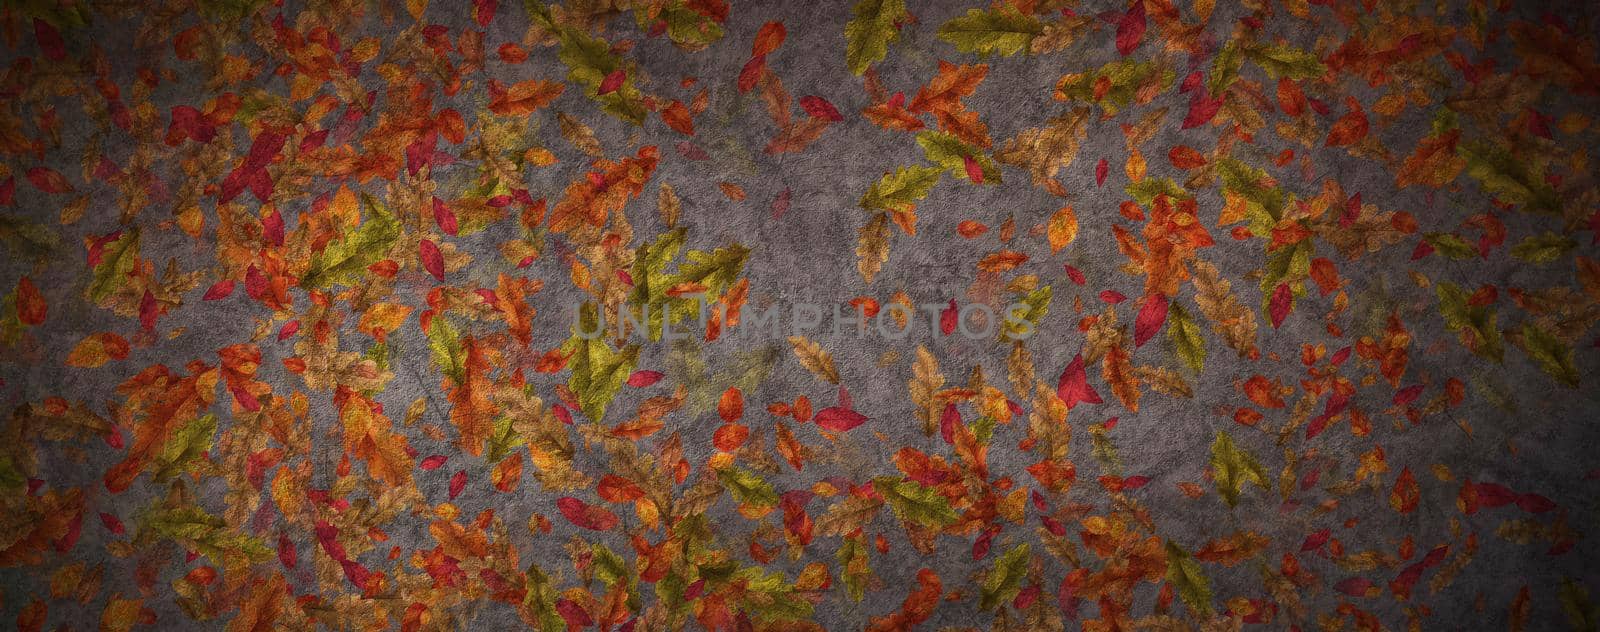 Colorful Autumn Mottled Watercolor Cement Orange Brown Gold Banner Background Wallpaper by yay_lmrb